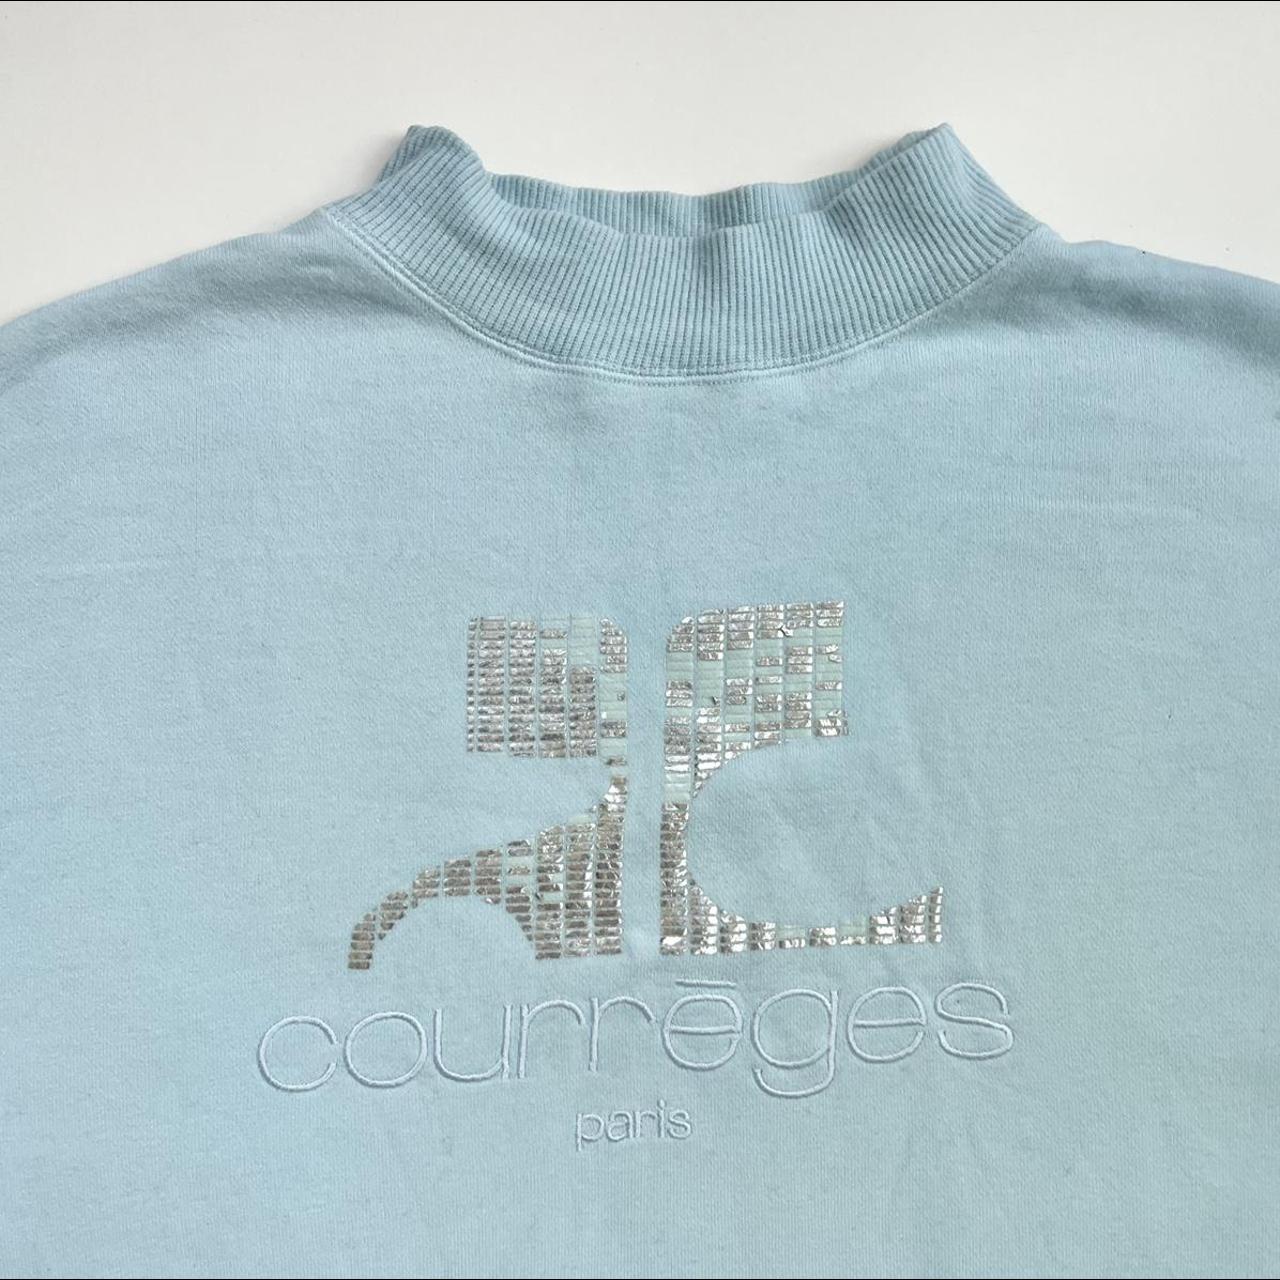 Product Image 1 - Courreges Sweatshirt

Missing size tag, fits